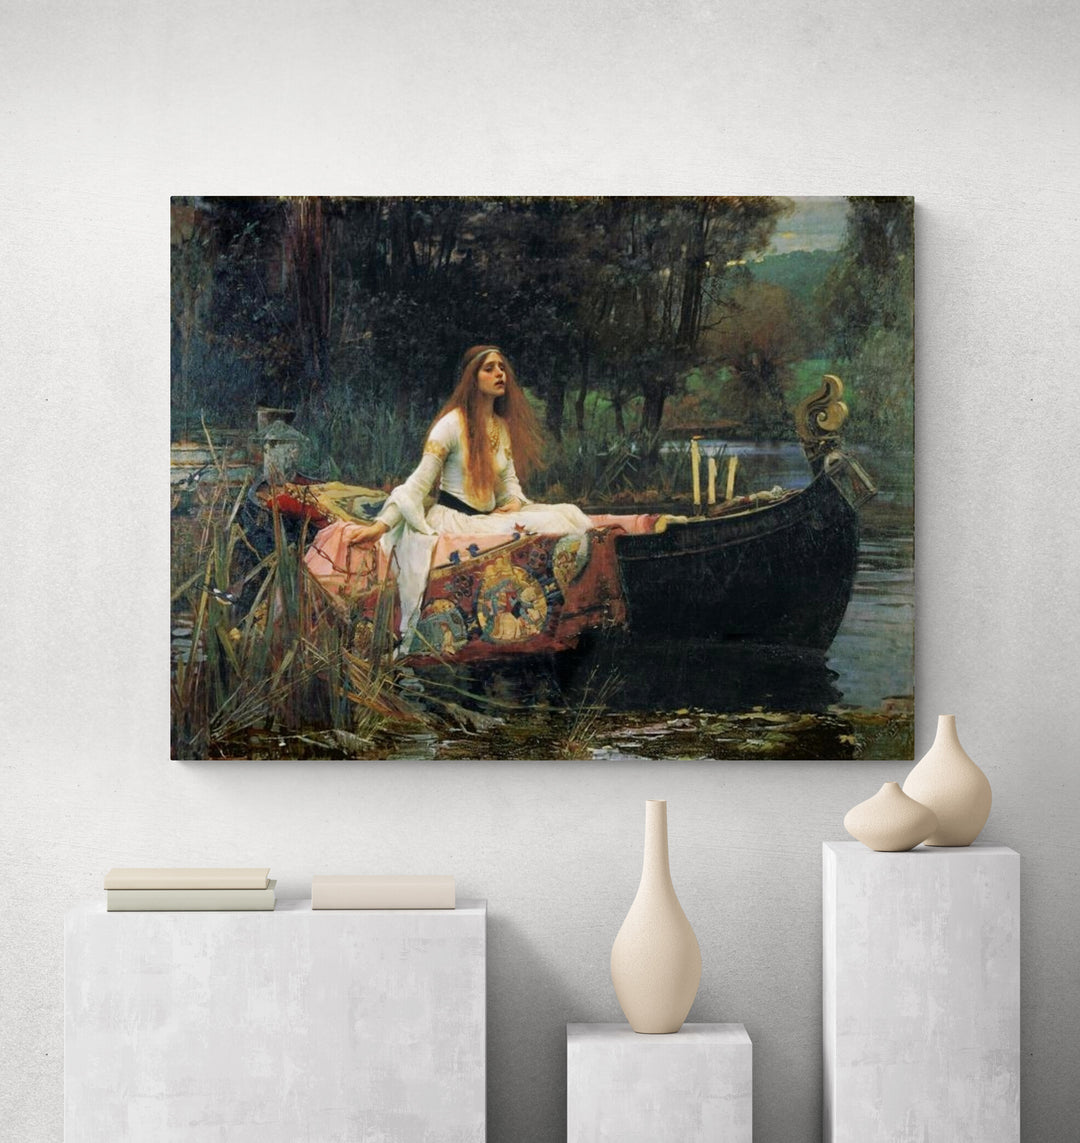 The Lady of Shalott  by John William Waterhouse in show room